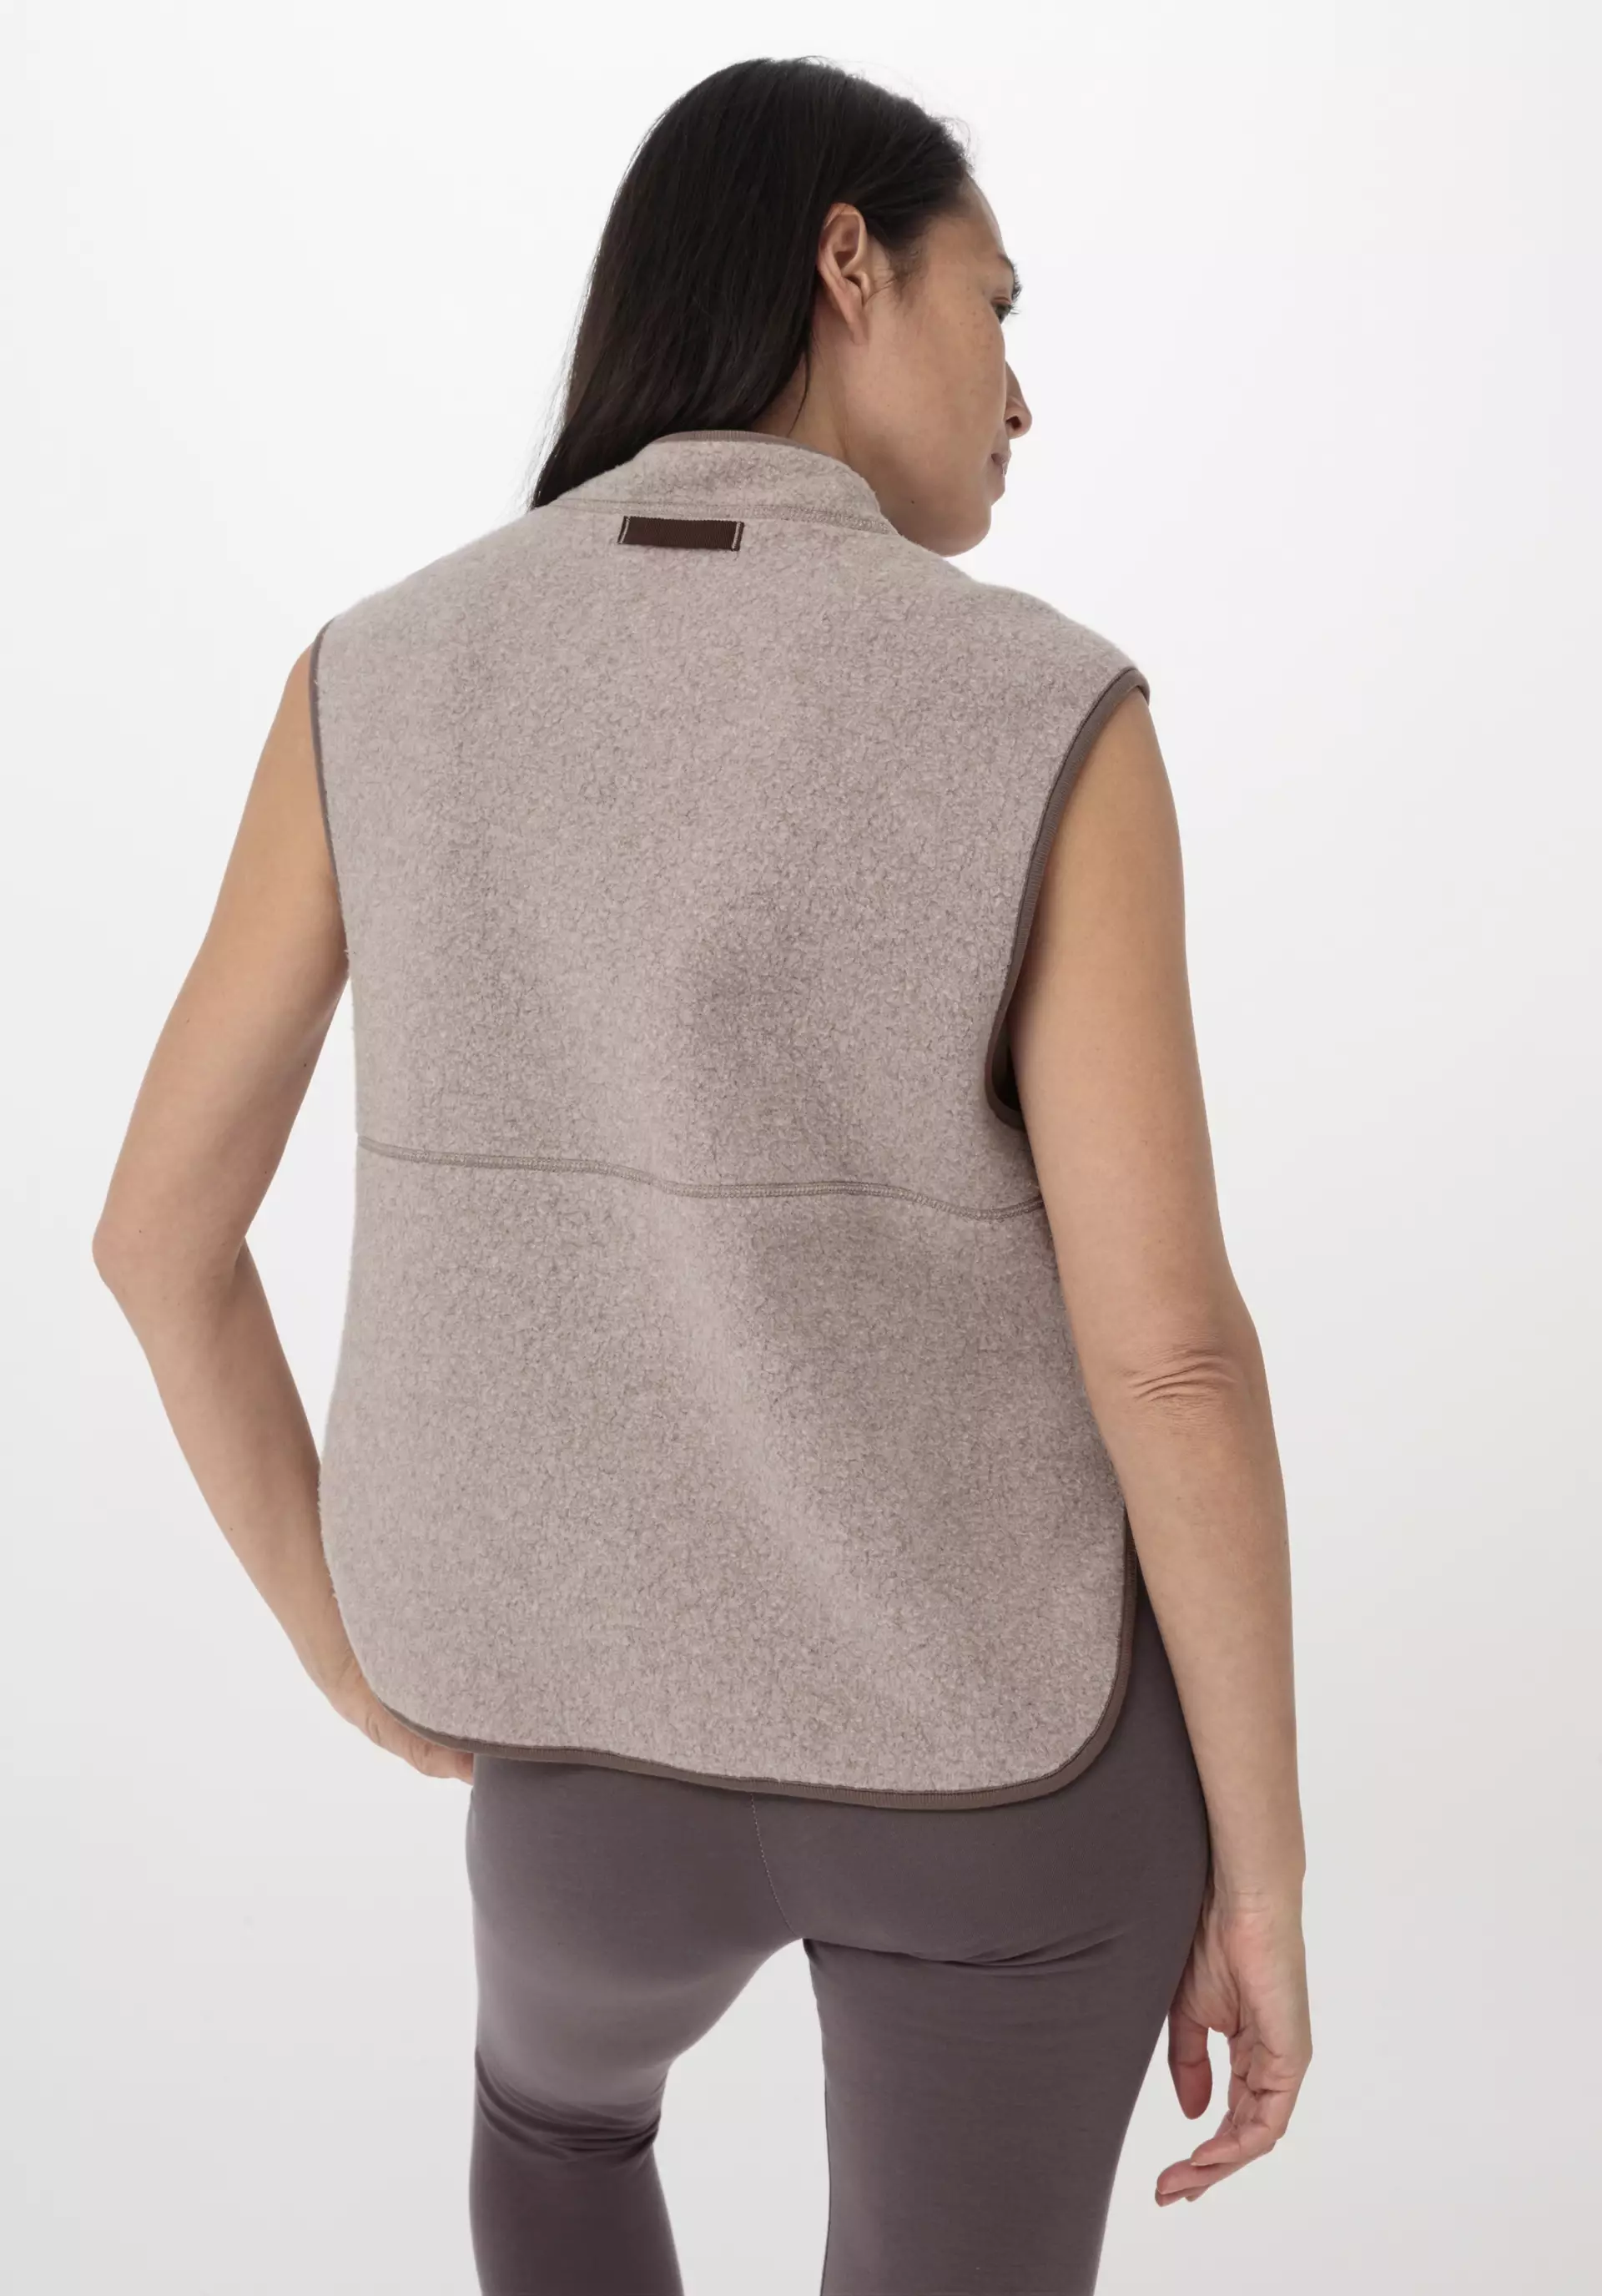 Fleece vest made from pure organic cotton - 2